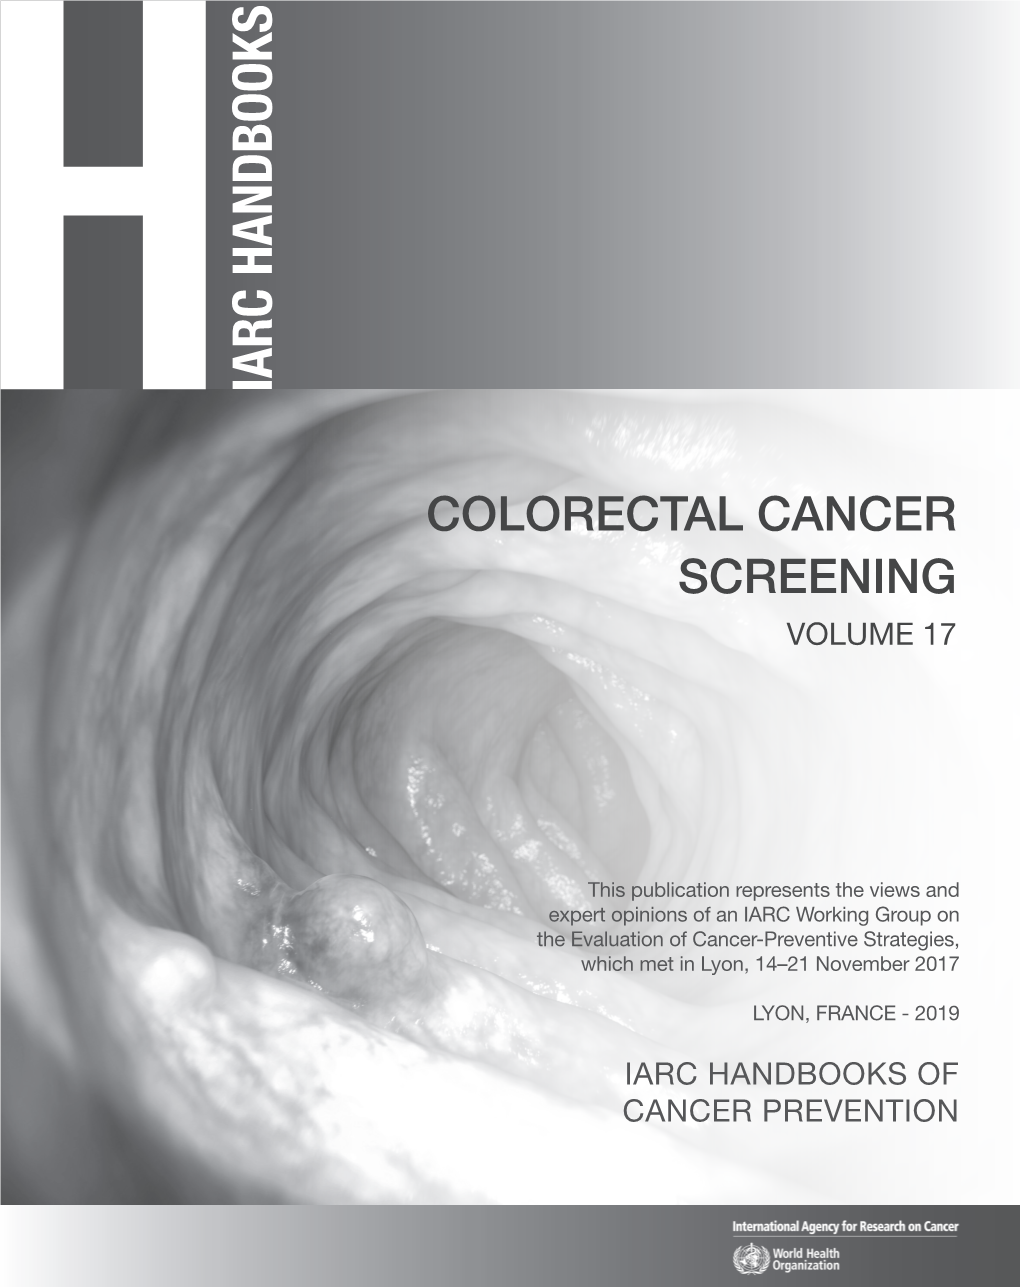 3. Studies of Colorectal Cancer Screening